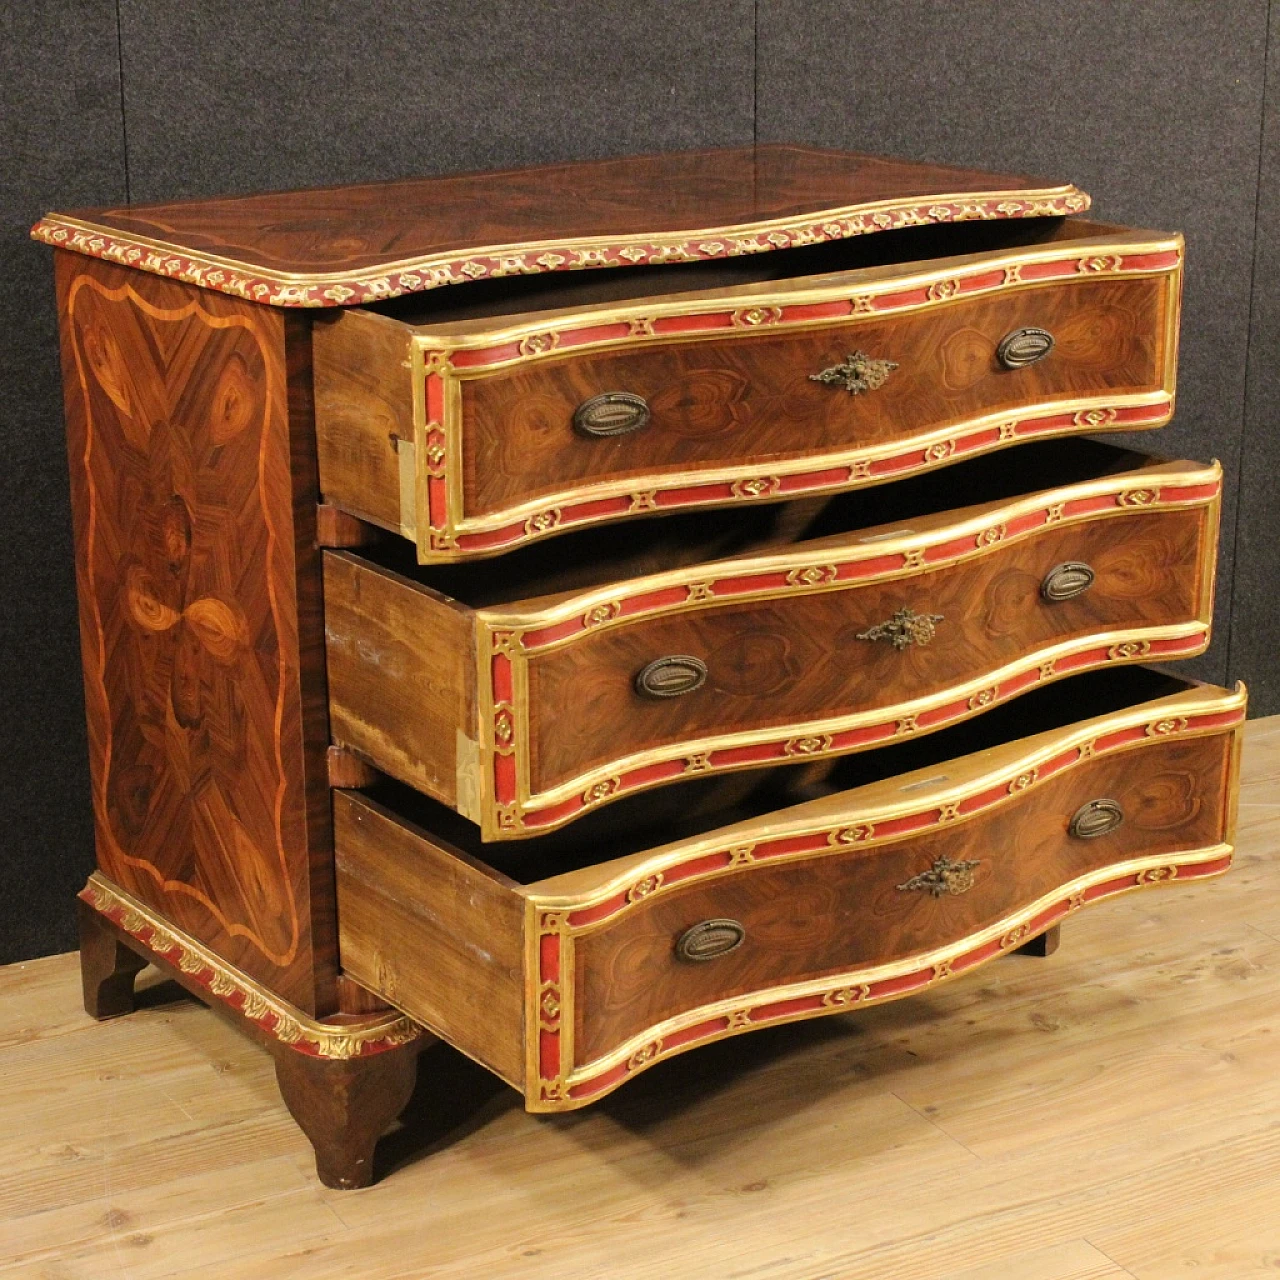 Genoese inlaid, lacquered and gilded wood dresser 16